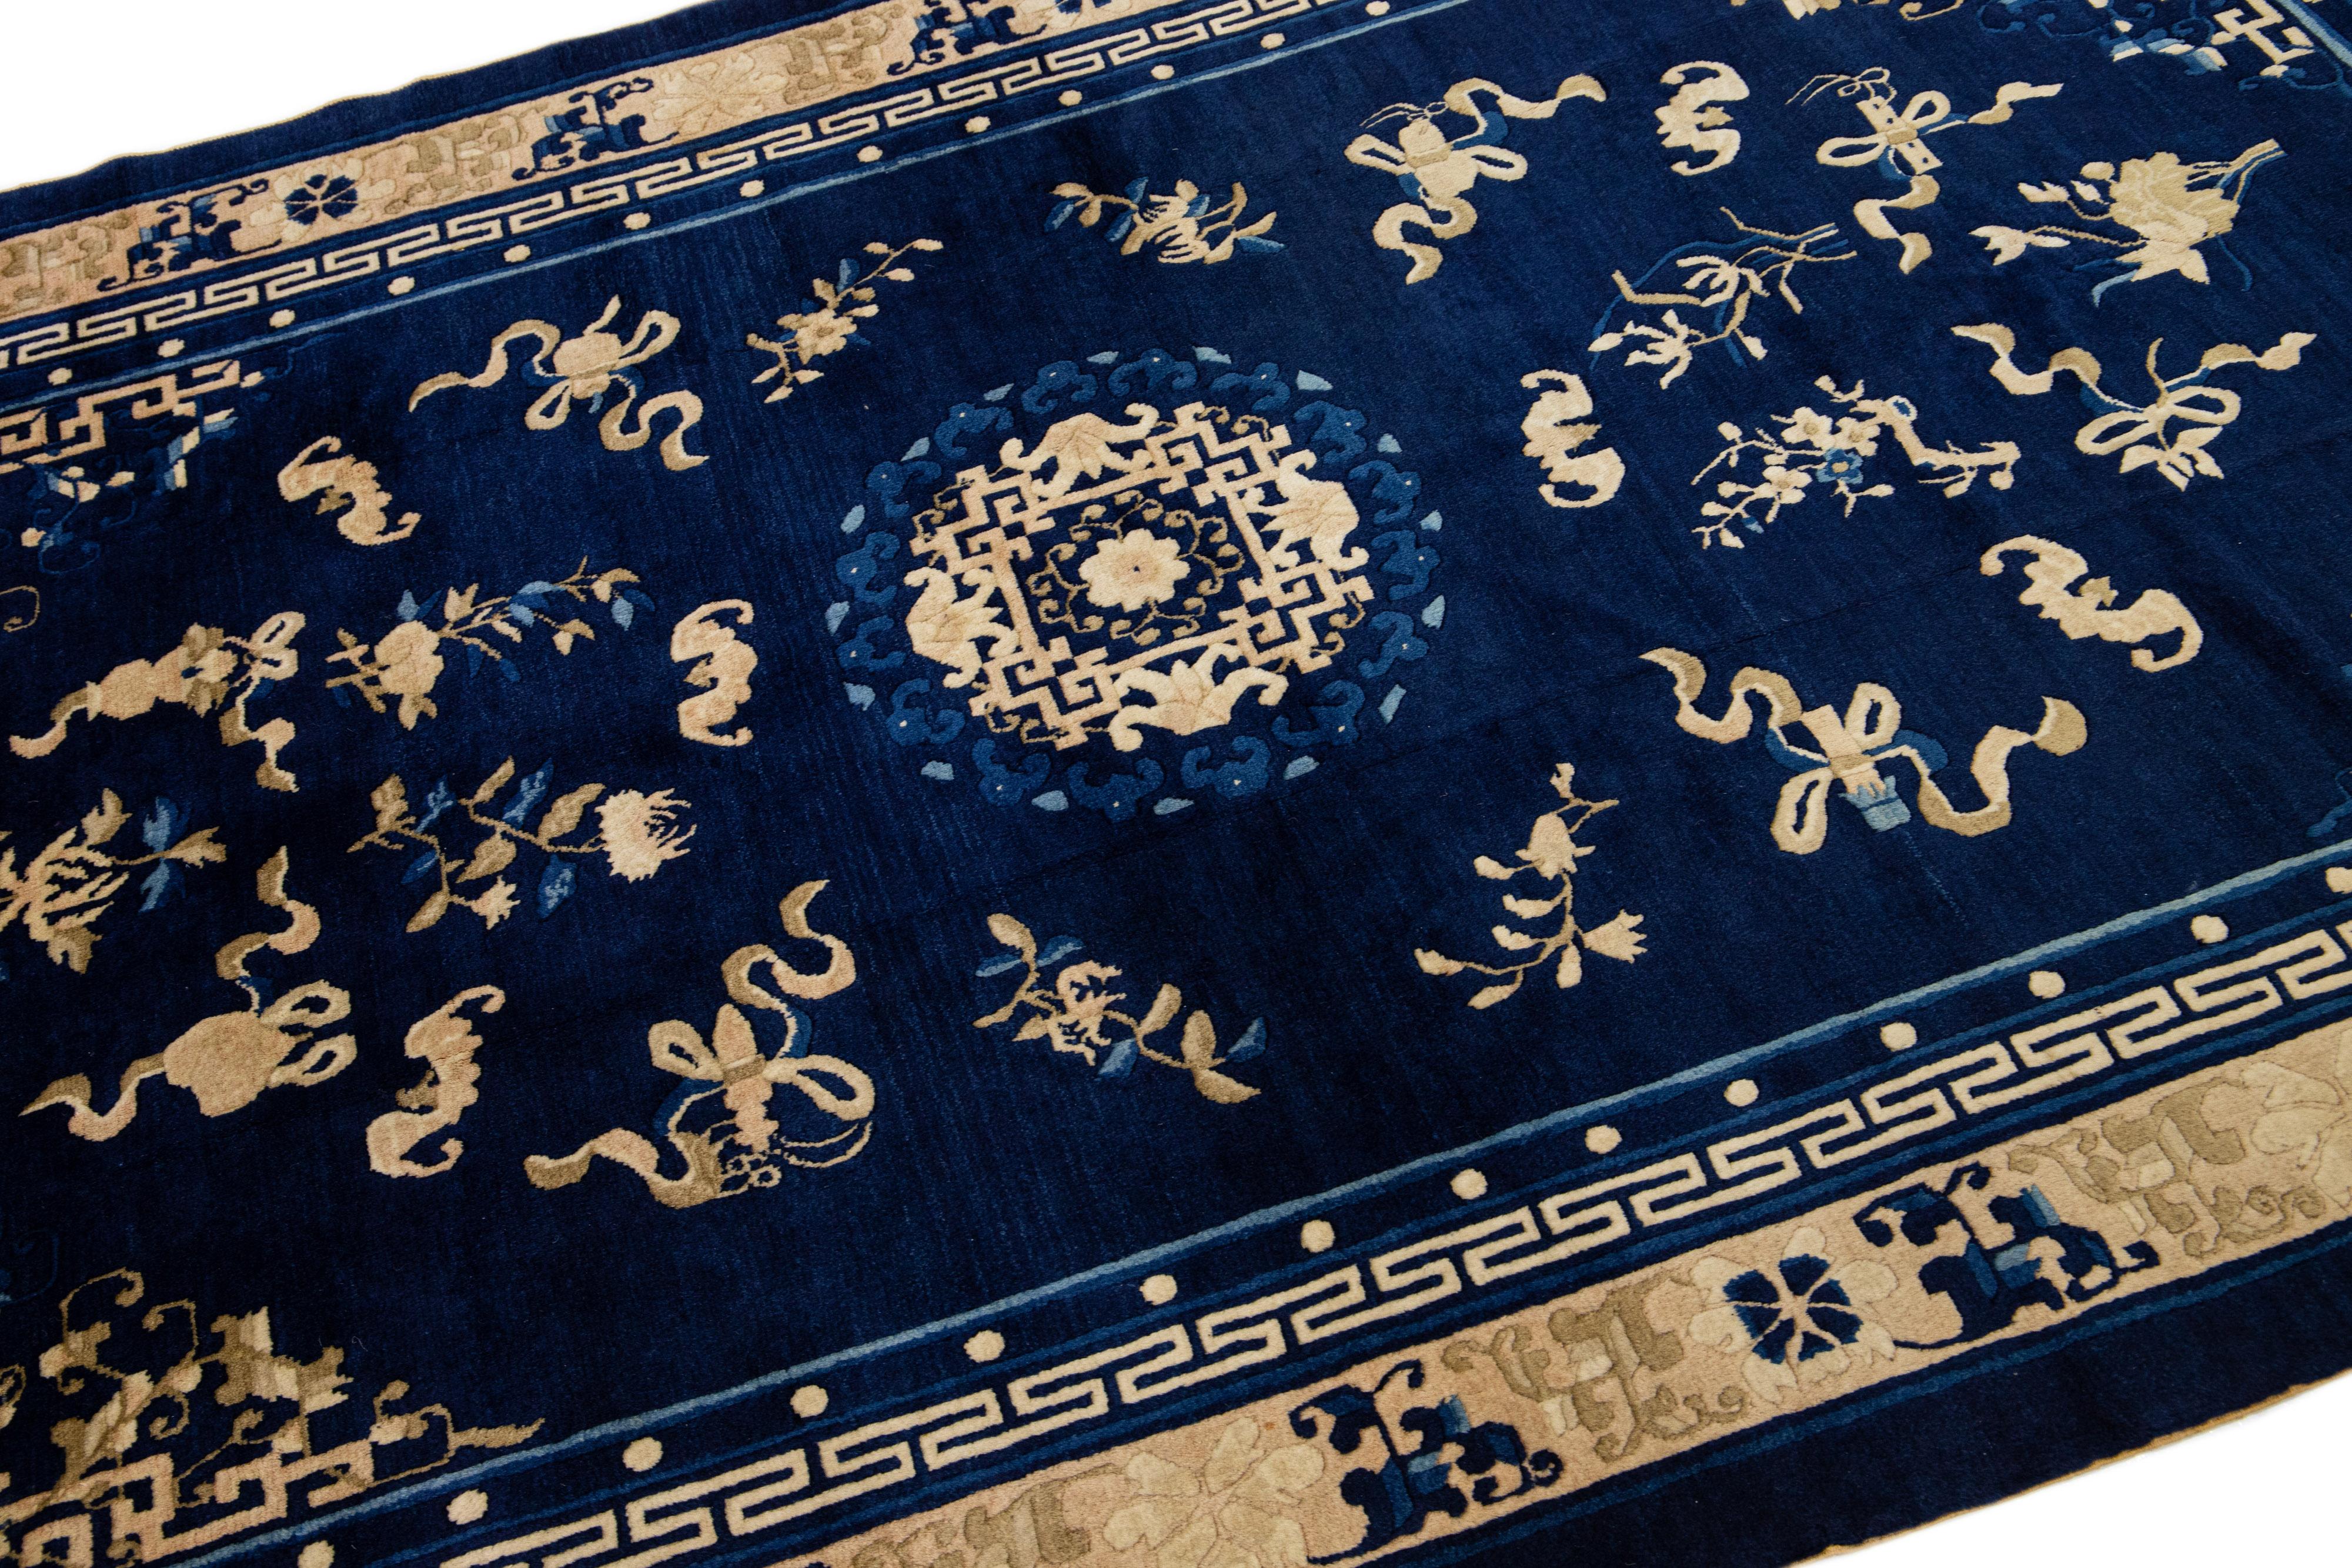 Chinese Export 1920s Antique Chinese Peking Wool Rug Handmade Blue with Classic Floral Design For Sale